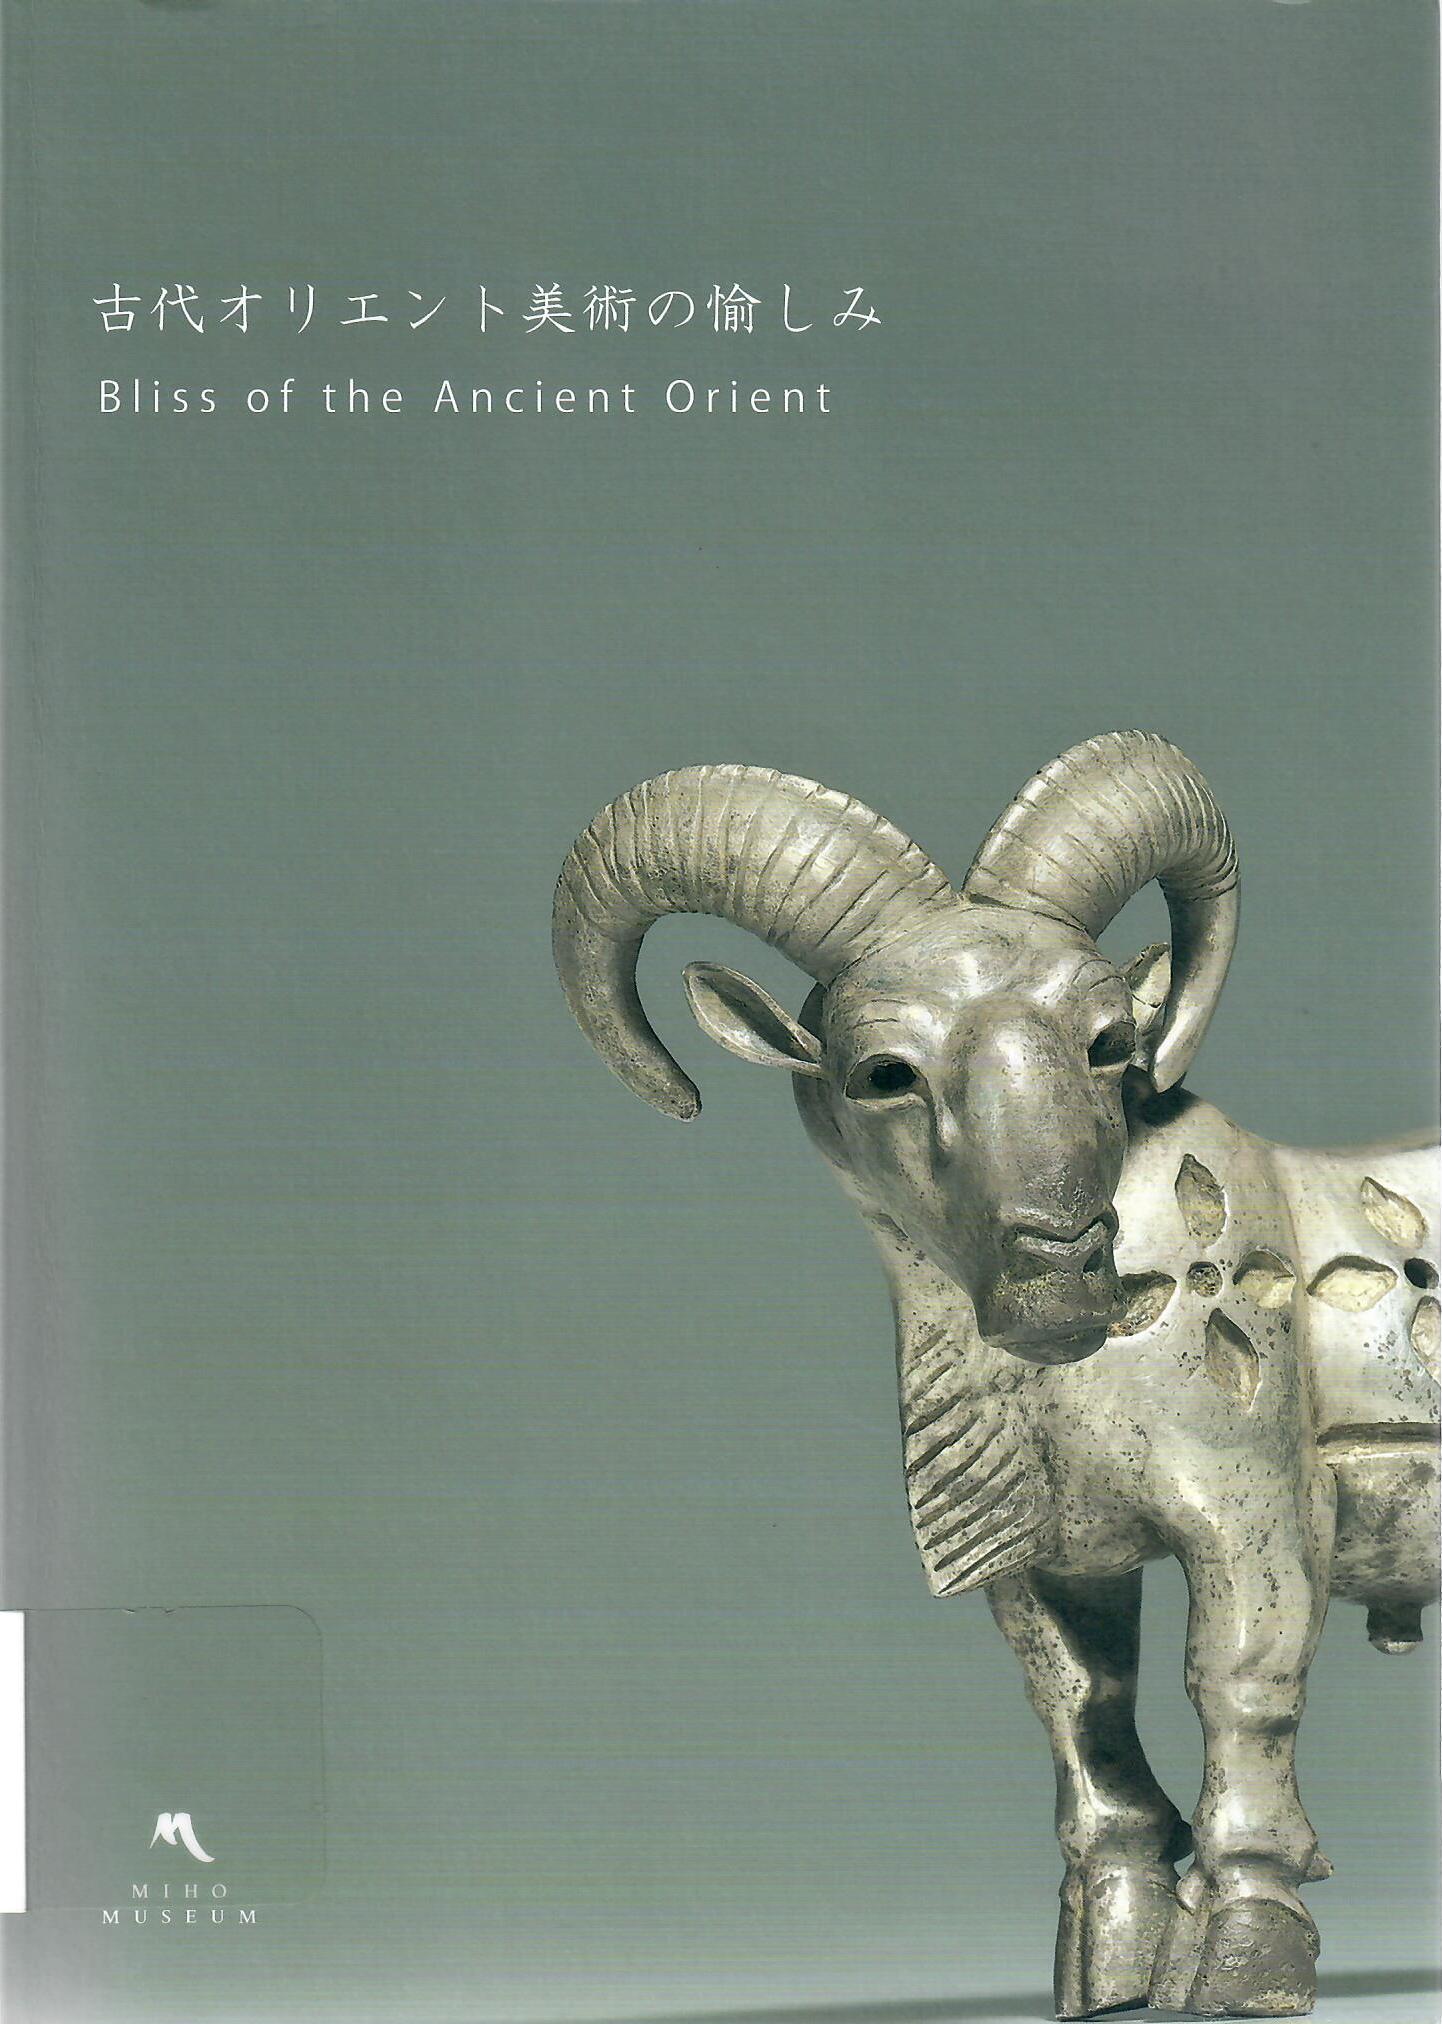 Bliss of the Ancient Orient